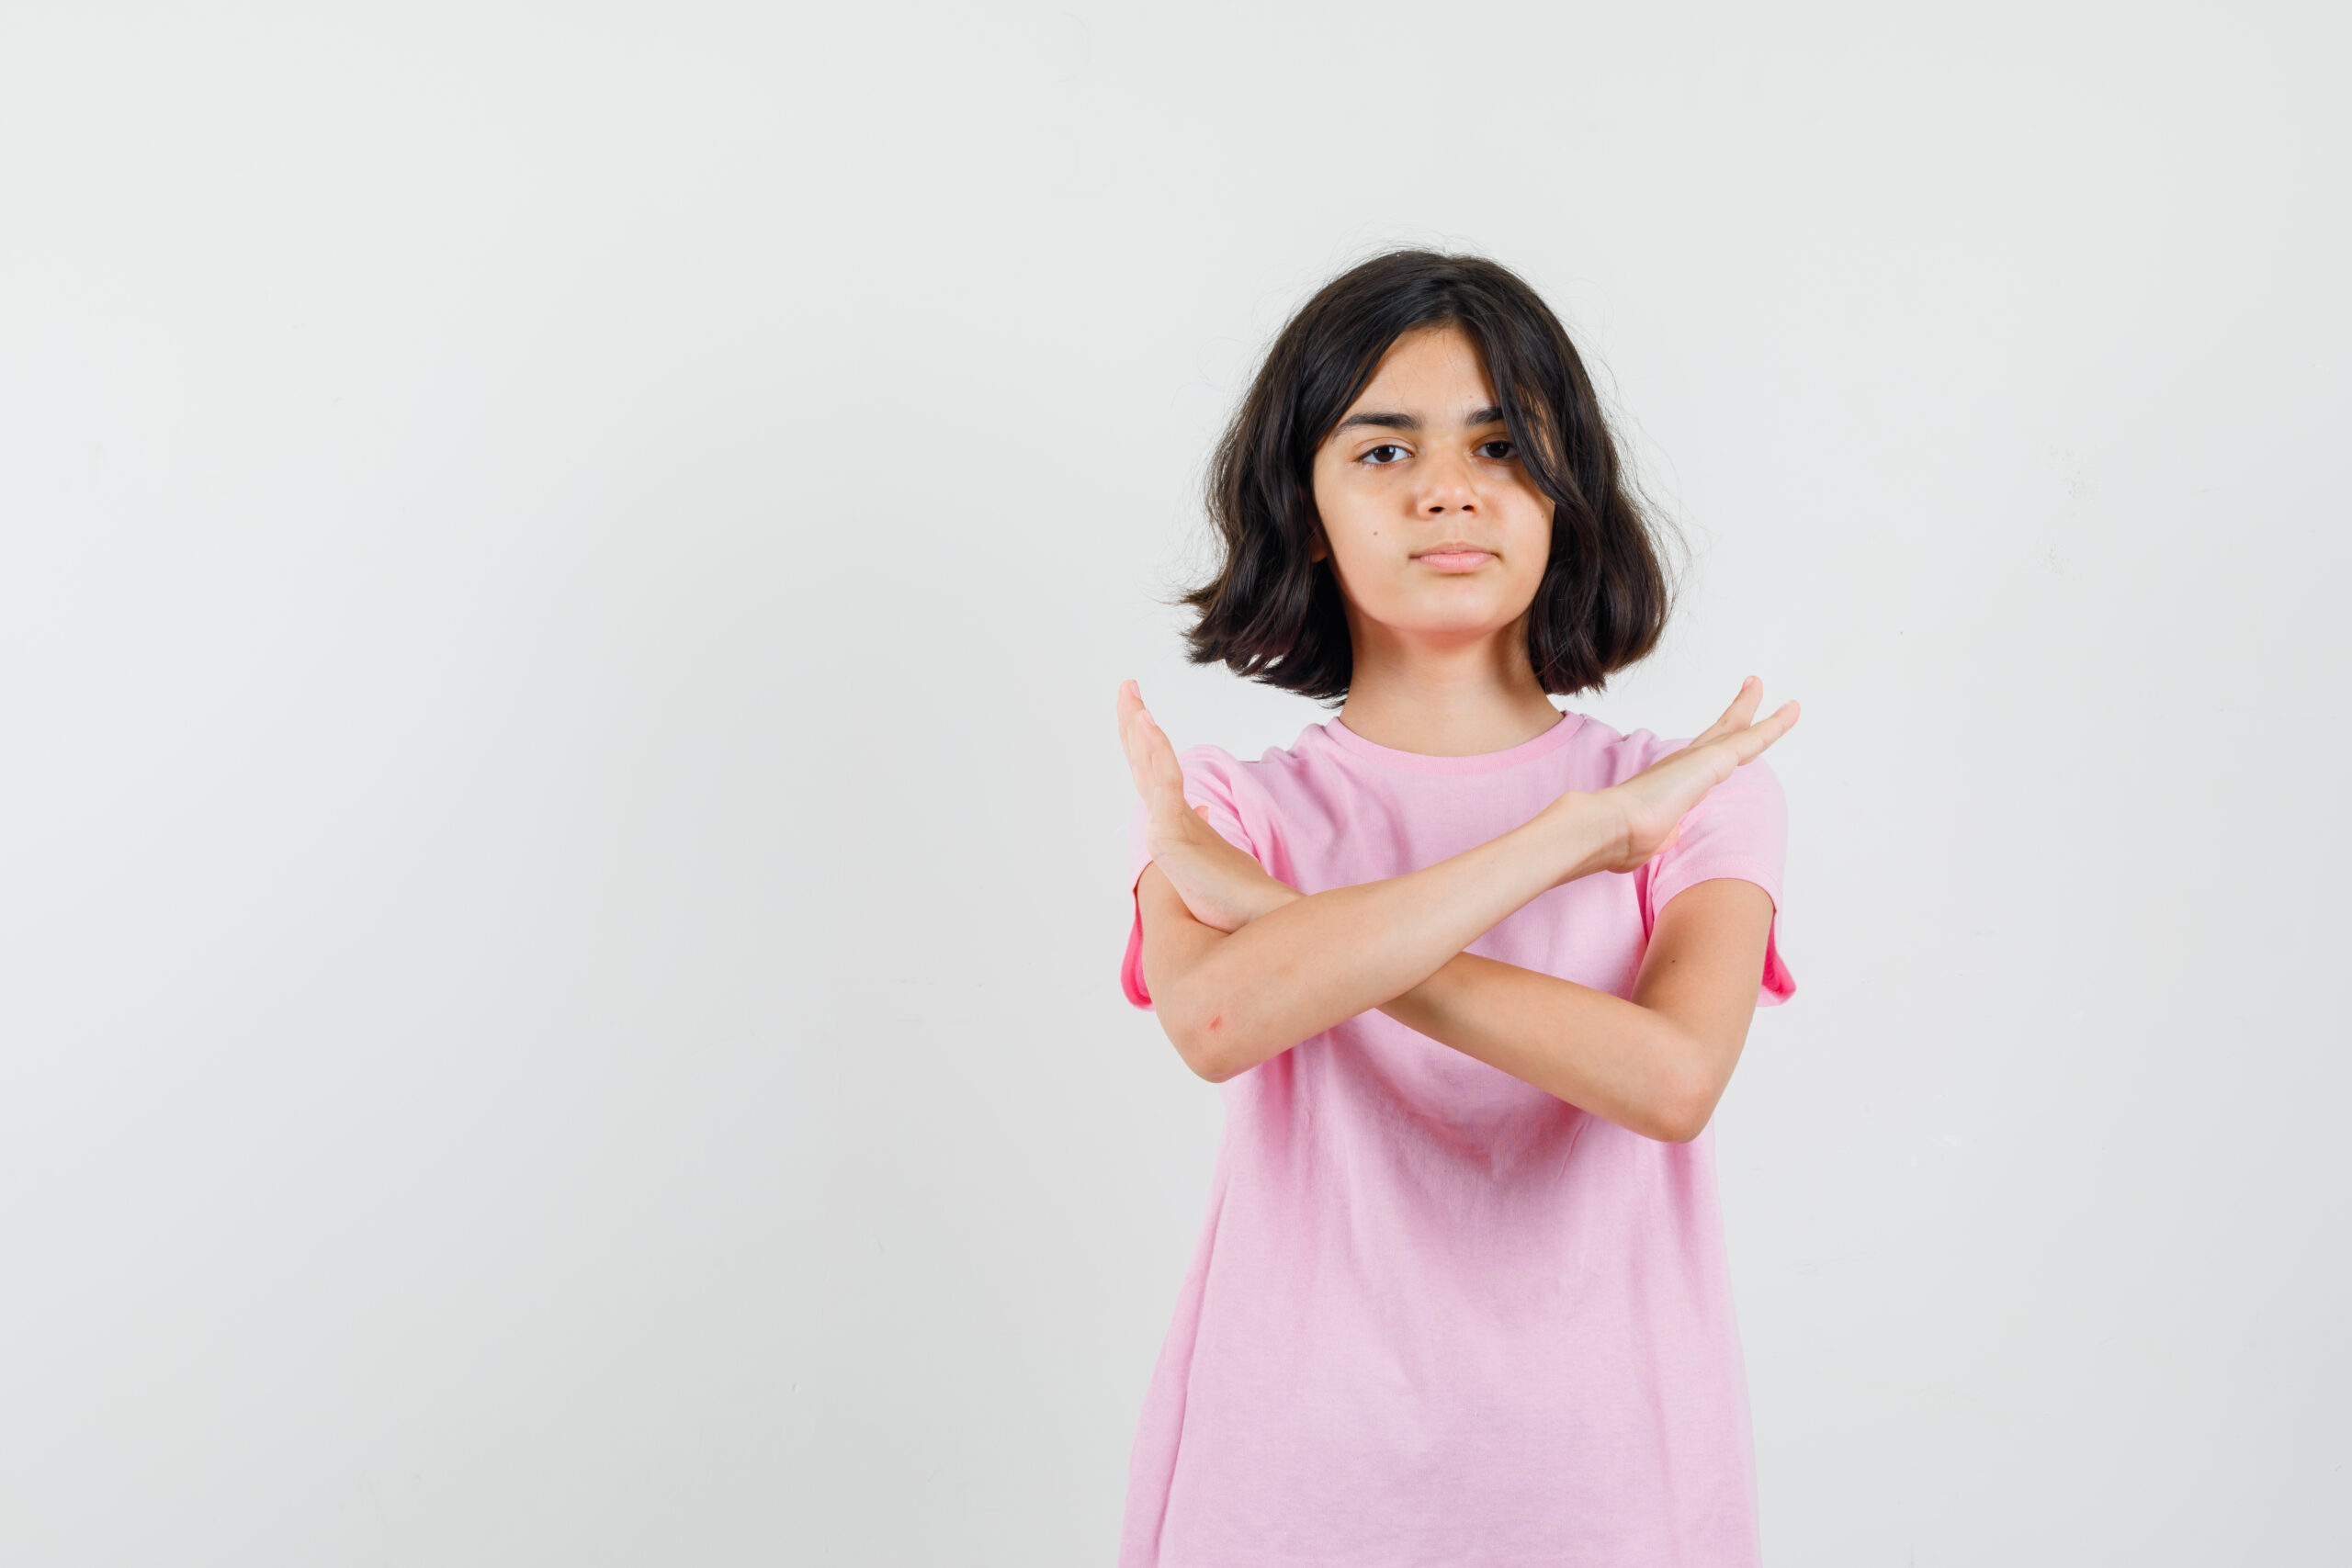 Little girl showing refusal gesture in pink t-shirt and looking resolute. front view.